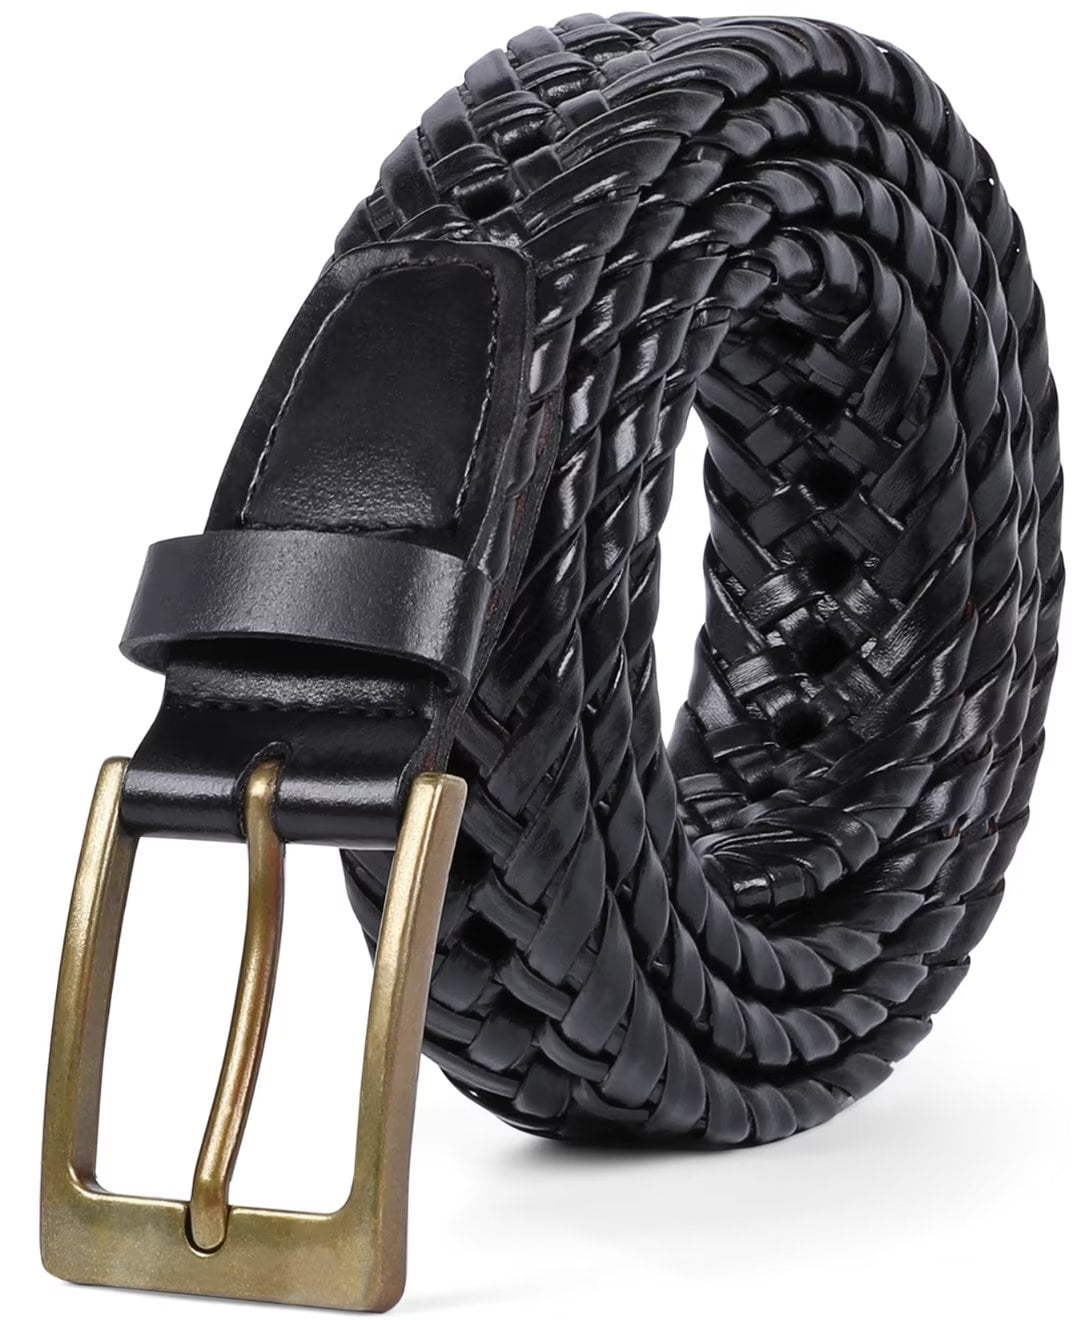 Jasgood Men's Braided Leather Belt, Braided Woven Belt for Men Casual Jeans with Solid Strap Single Prong Buckle Brown 125cm(49Inch)